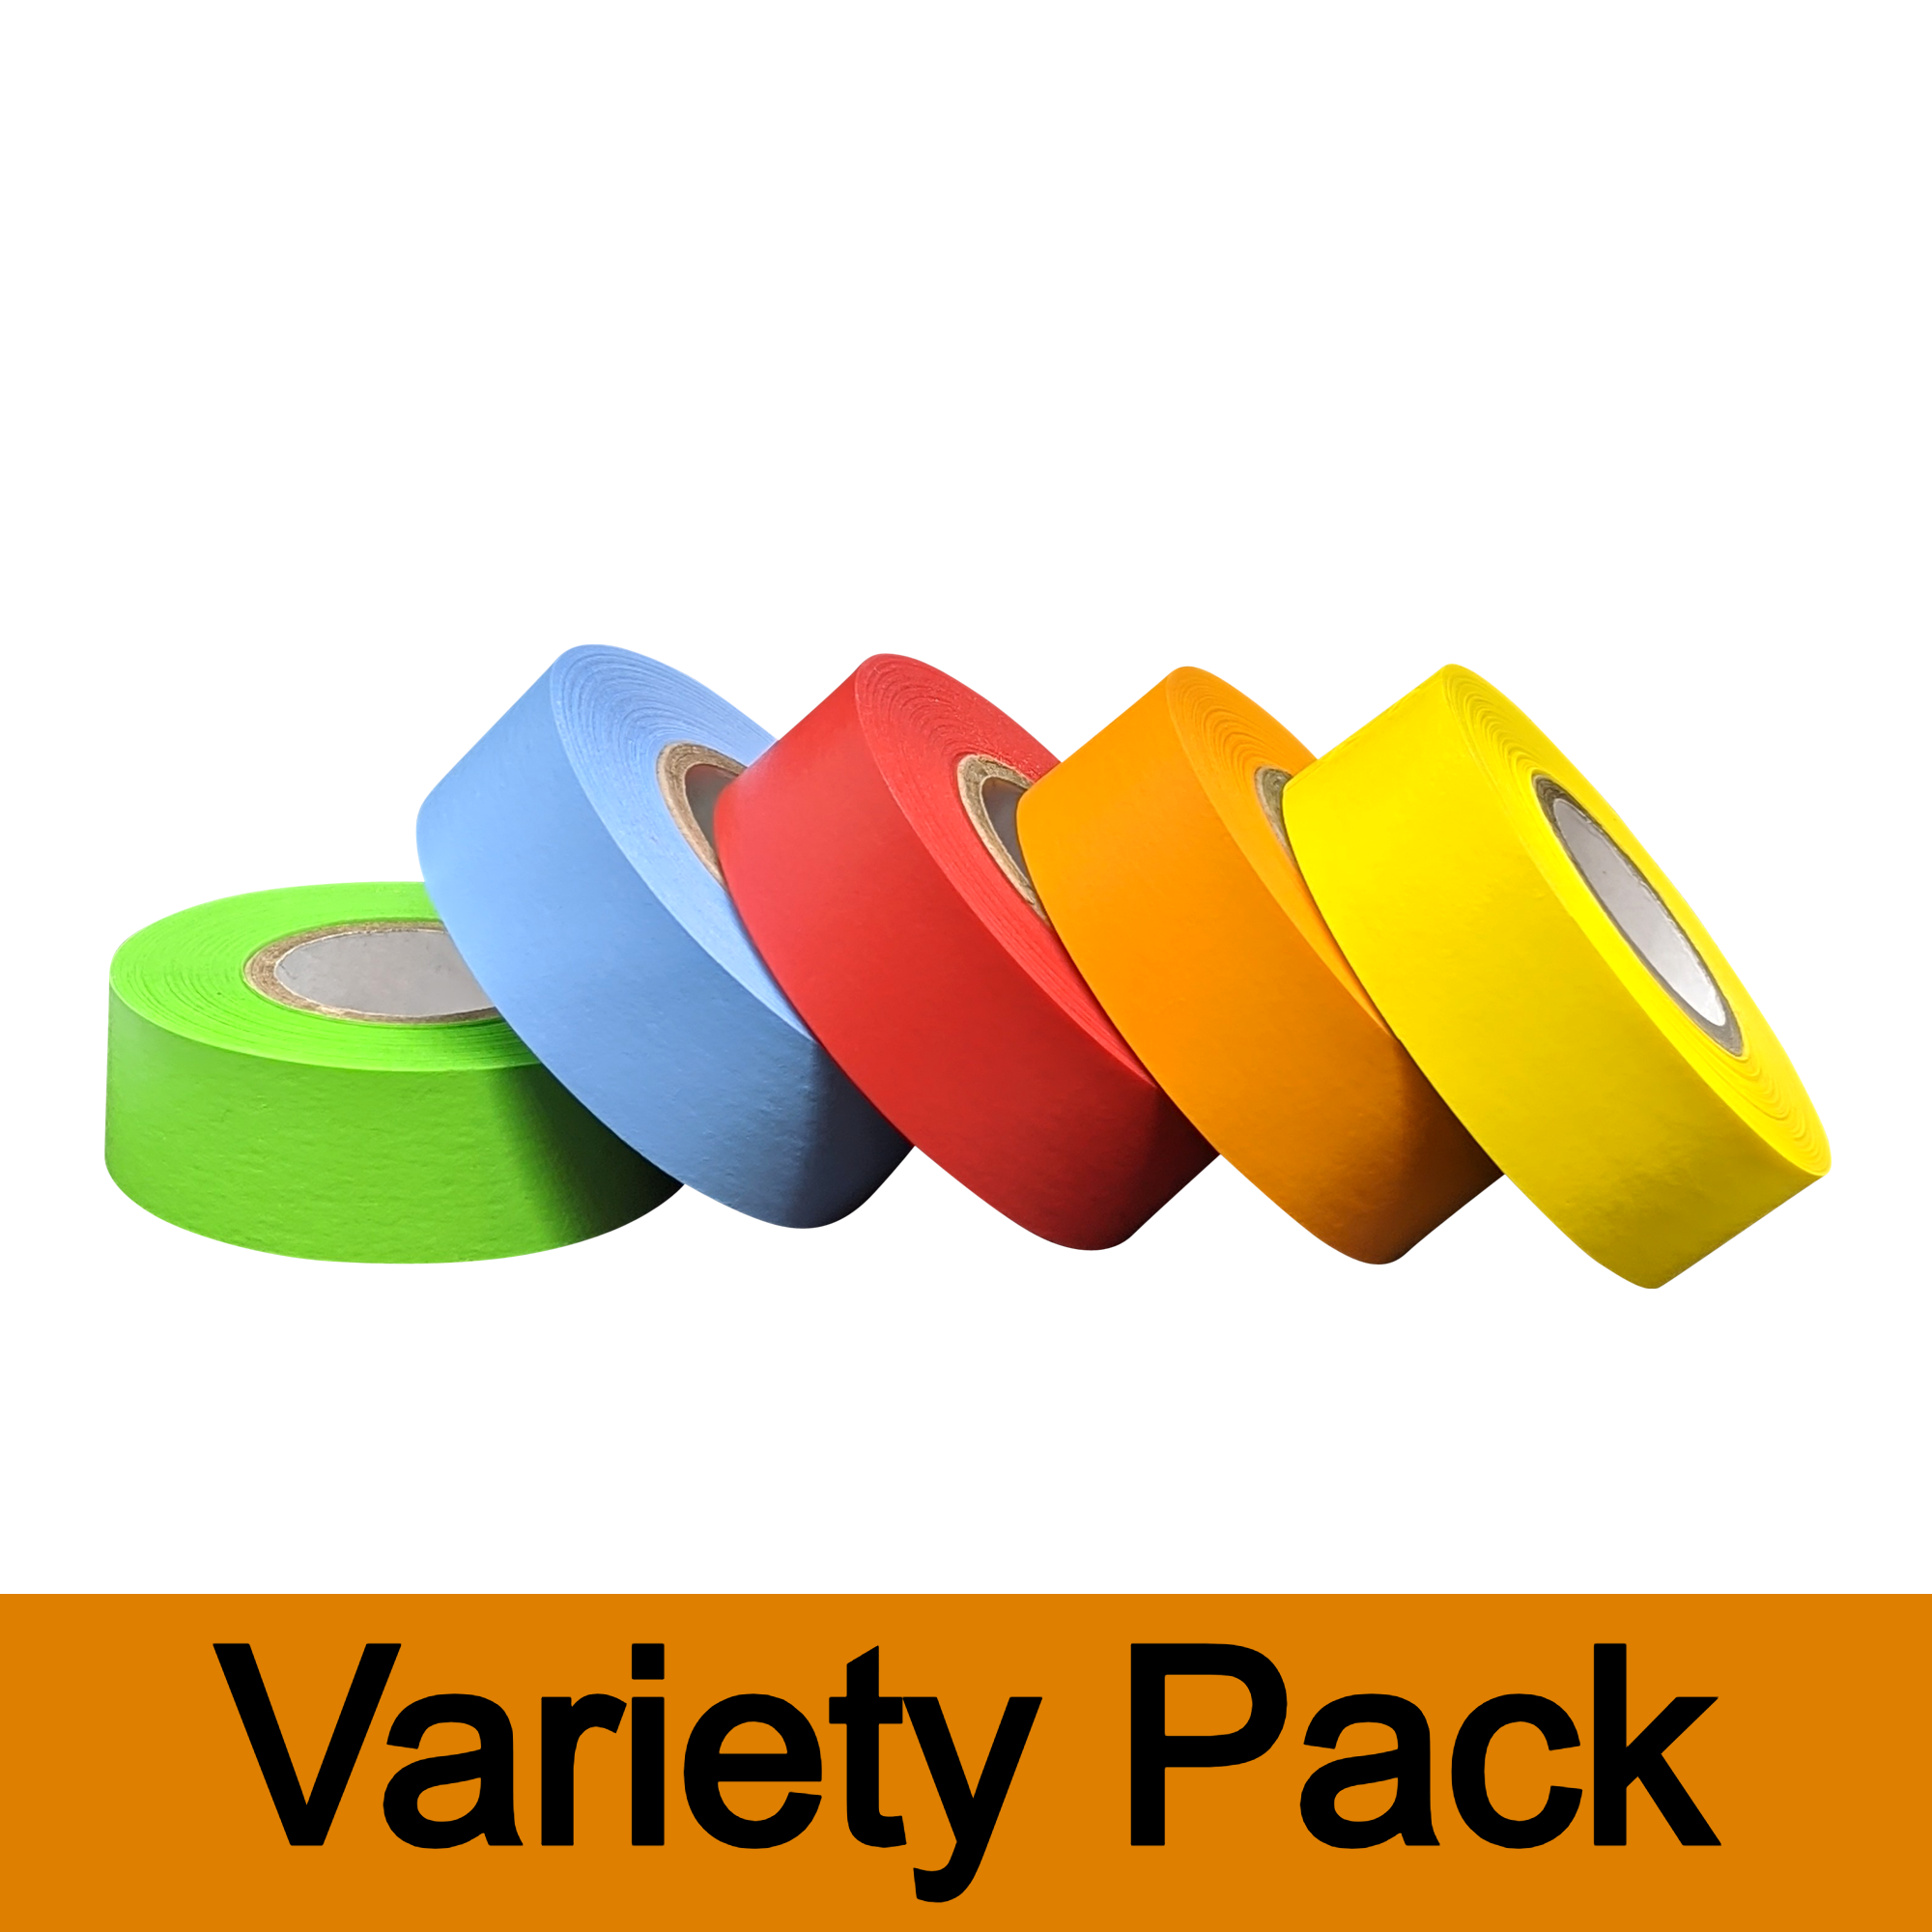 Bartovation Lab Labeling Tape Variety Pack 500 Inches Long x 1 inch Width 1 inch Diameter Core 5 Rolls of Assorted Colors for Color Coding and Marking